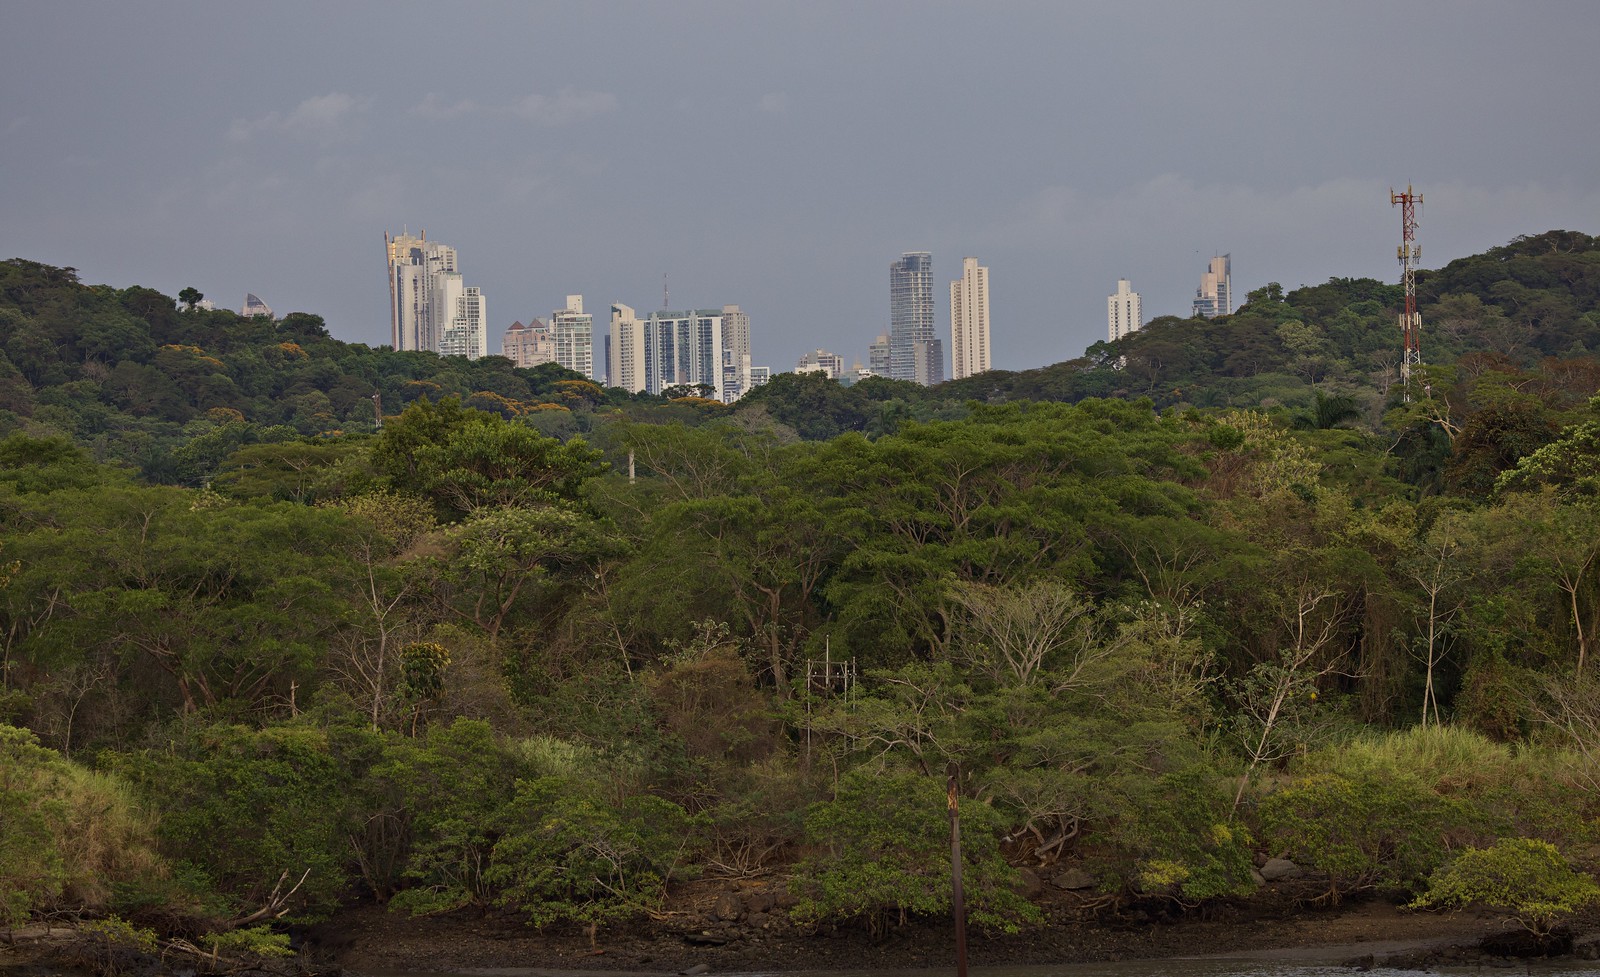 Panama City rising over the jungle in the twilight